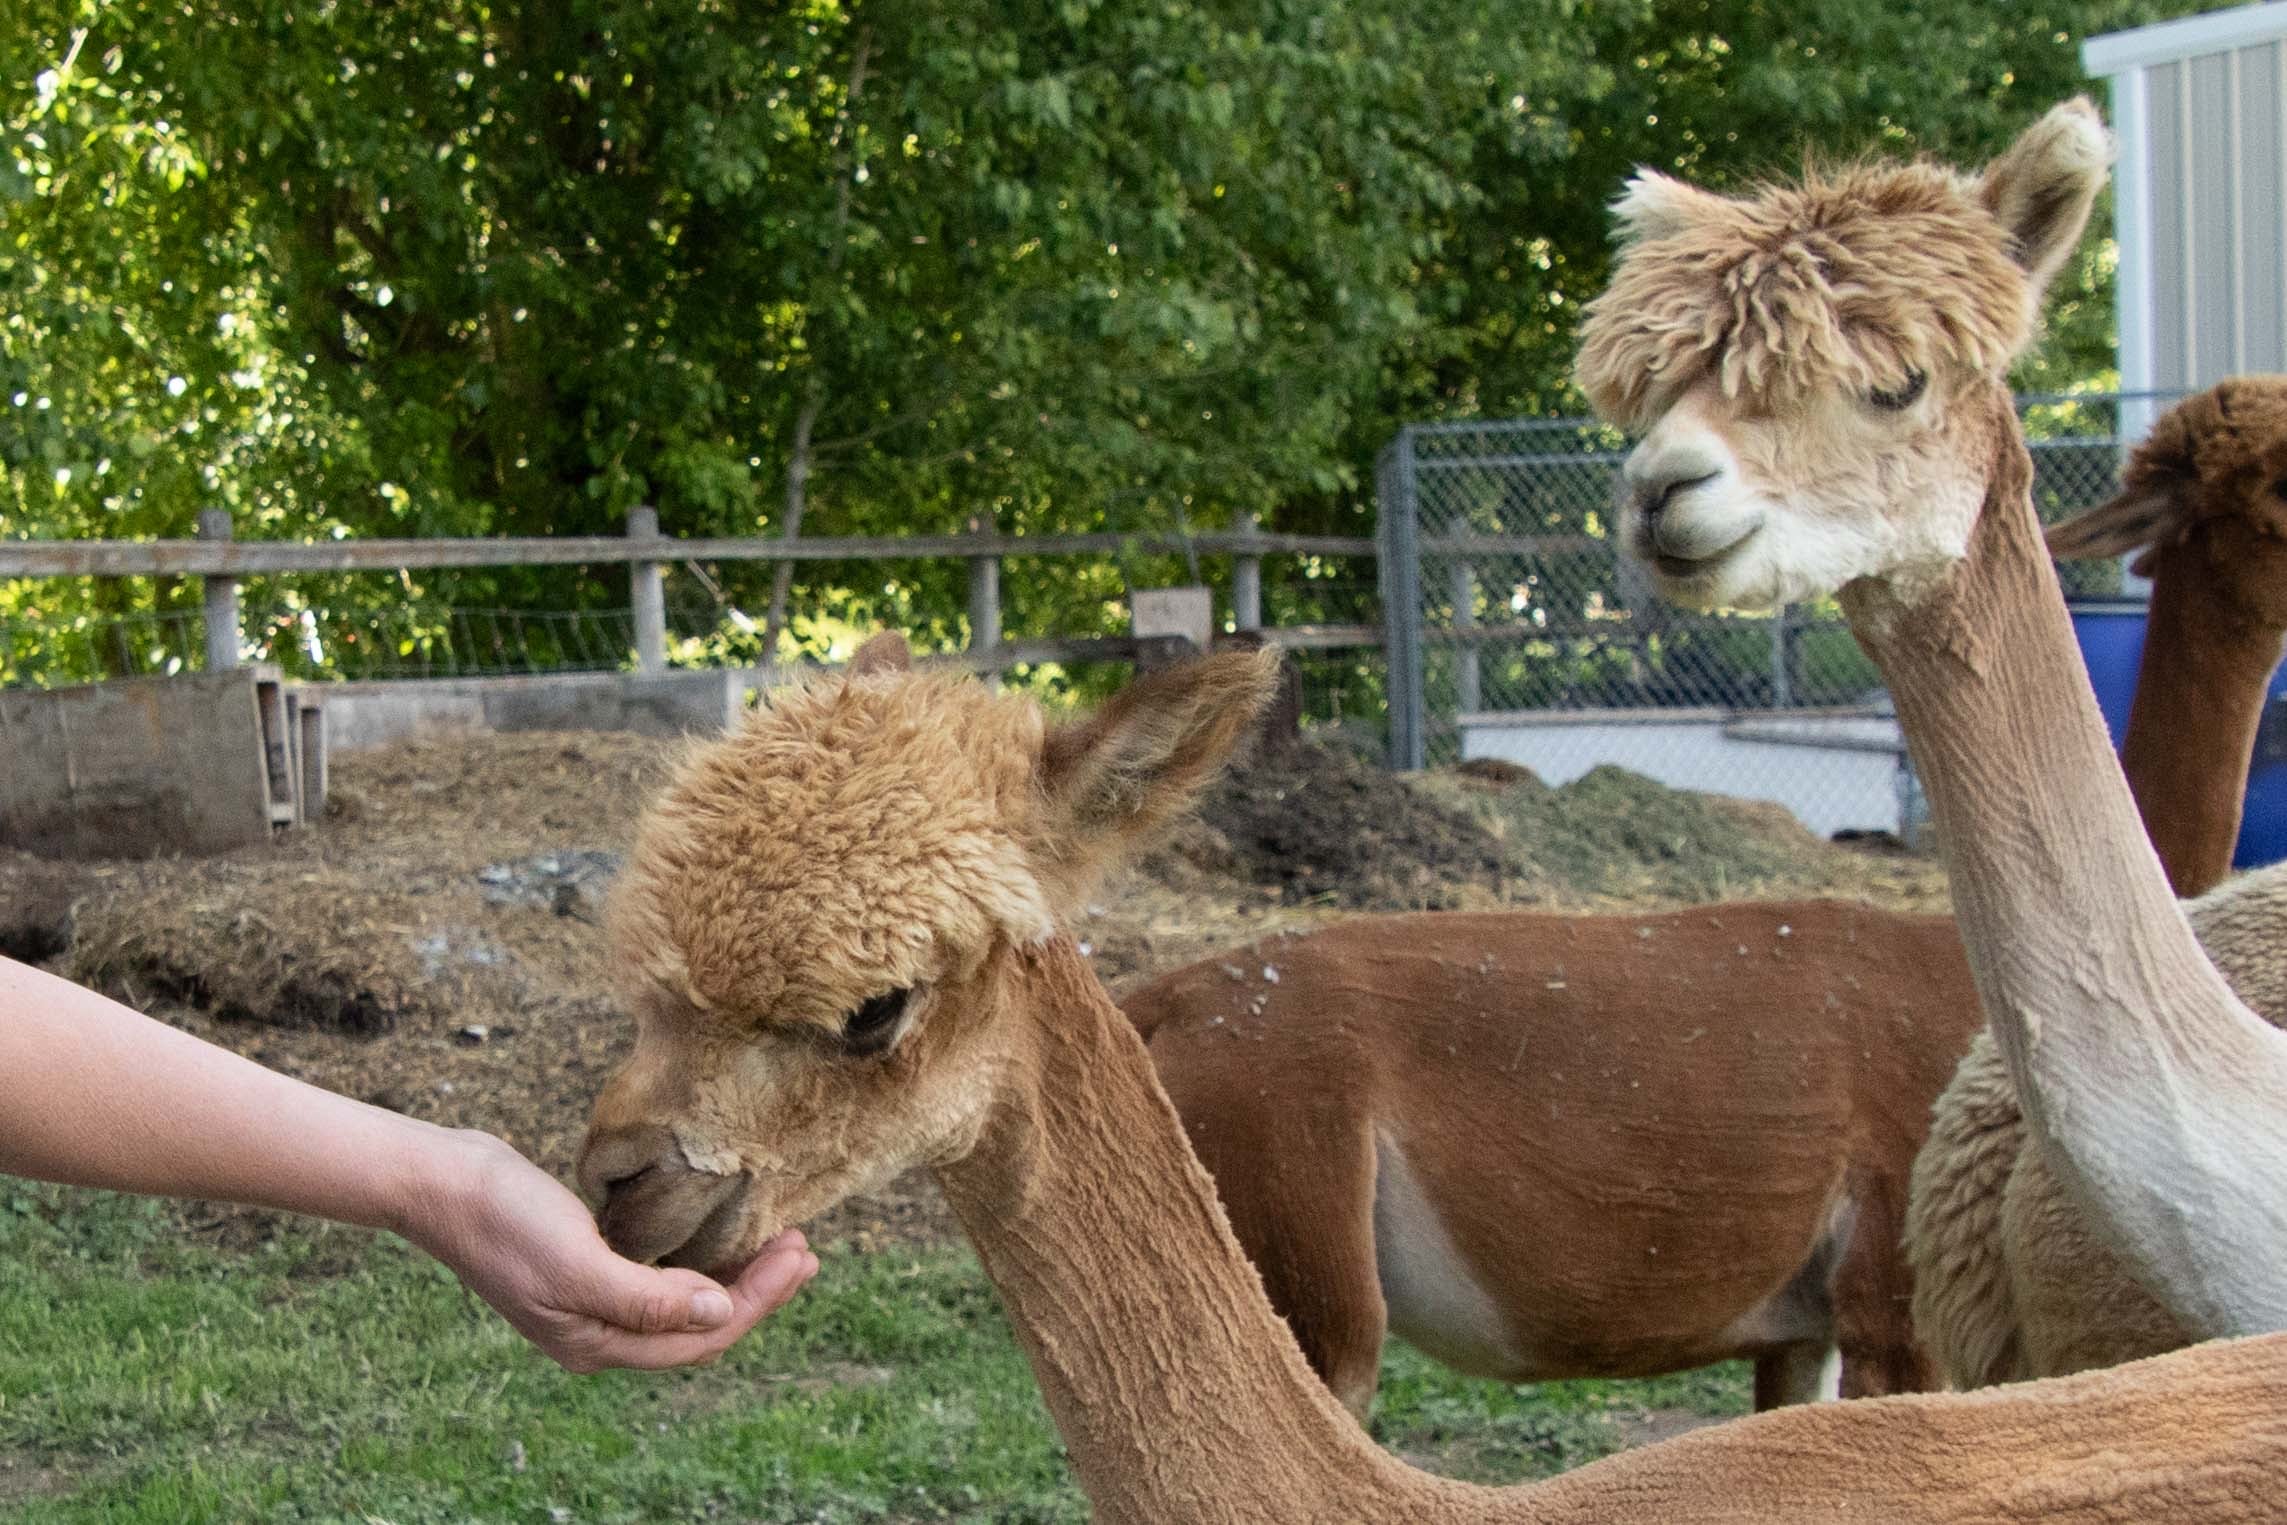 Camper submitted image from Windbreak Farm Alpacas - 4